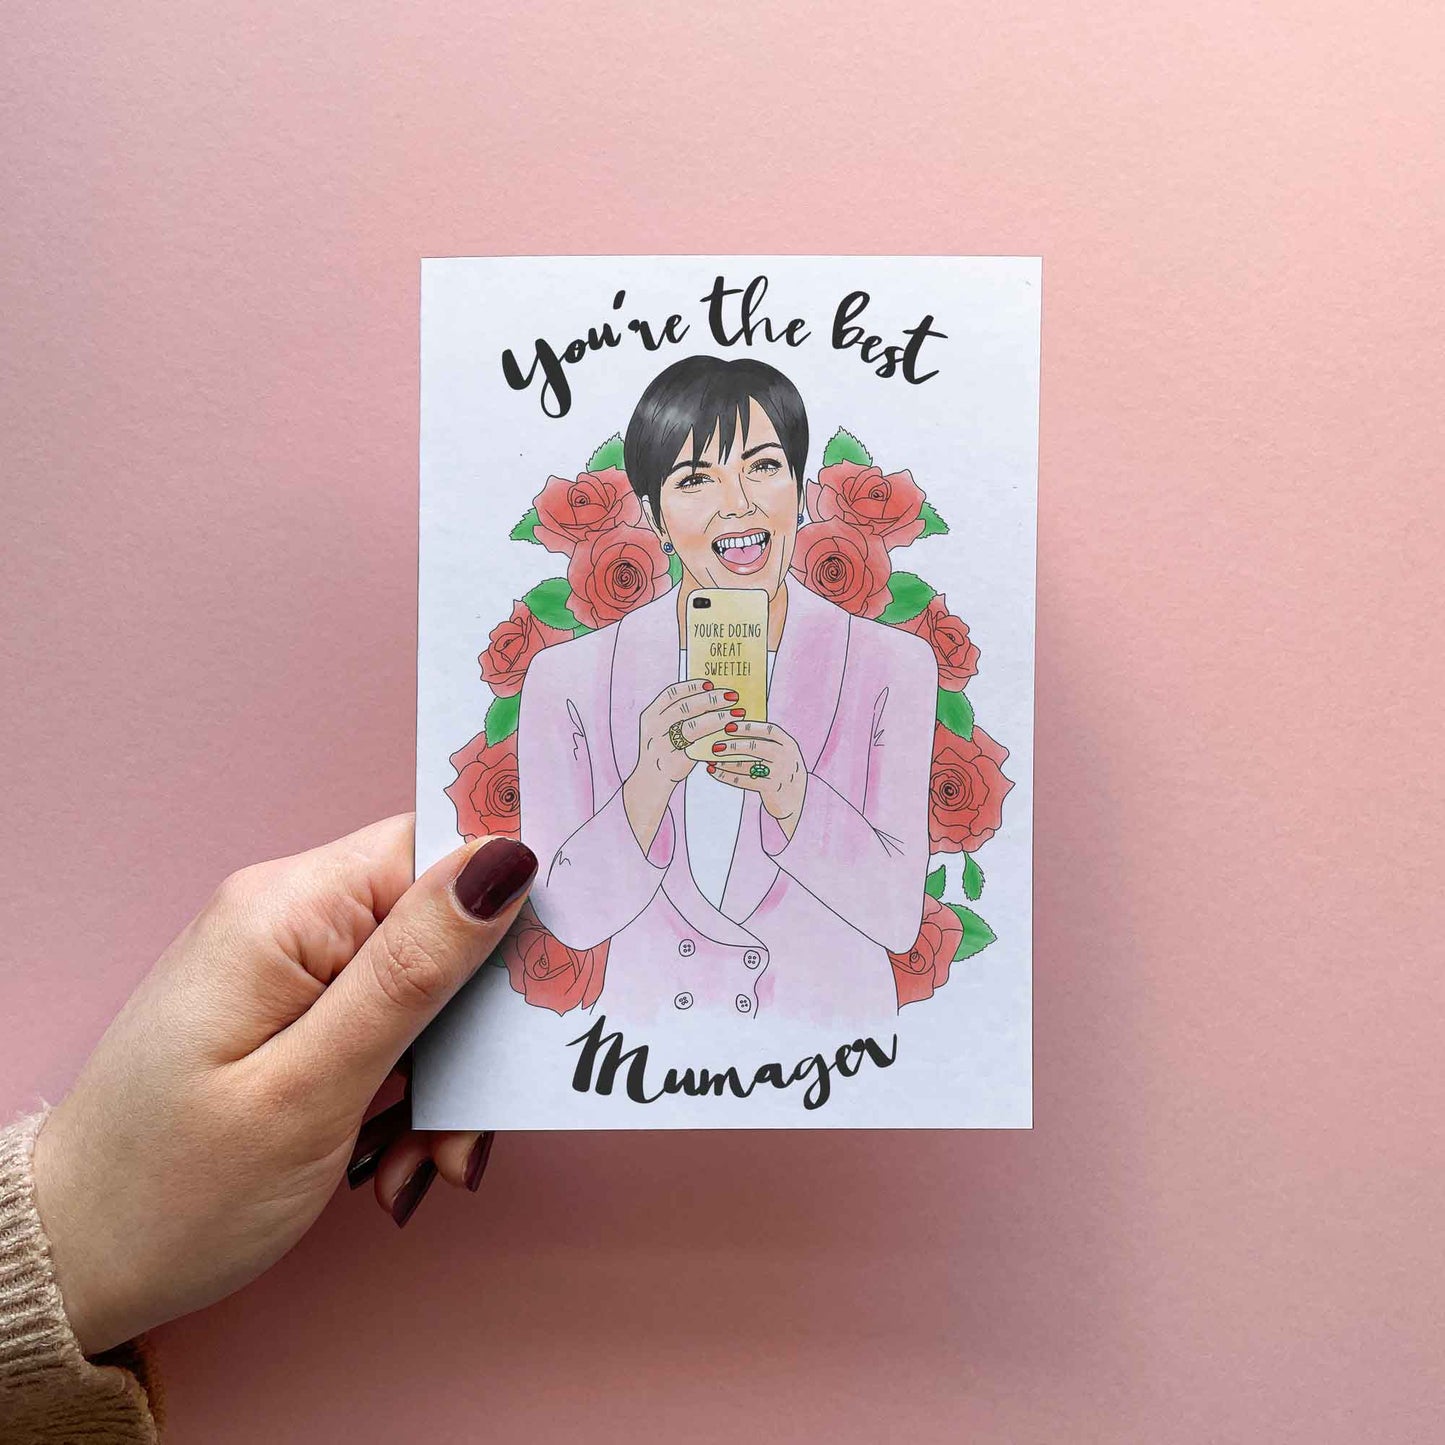 Funny Mother's Day Card and gift ideas for mum. Card reading you're the best mumager, kris Jenner recording using a phone with a case that says you're doing great sweetie!